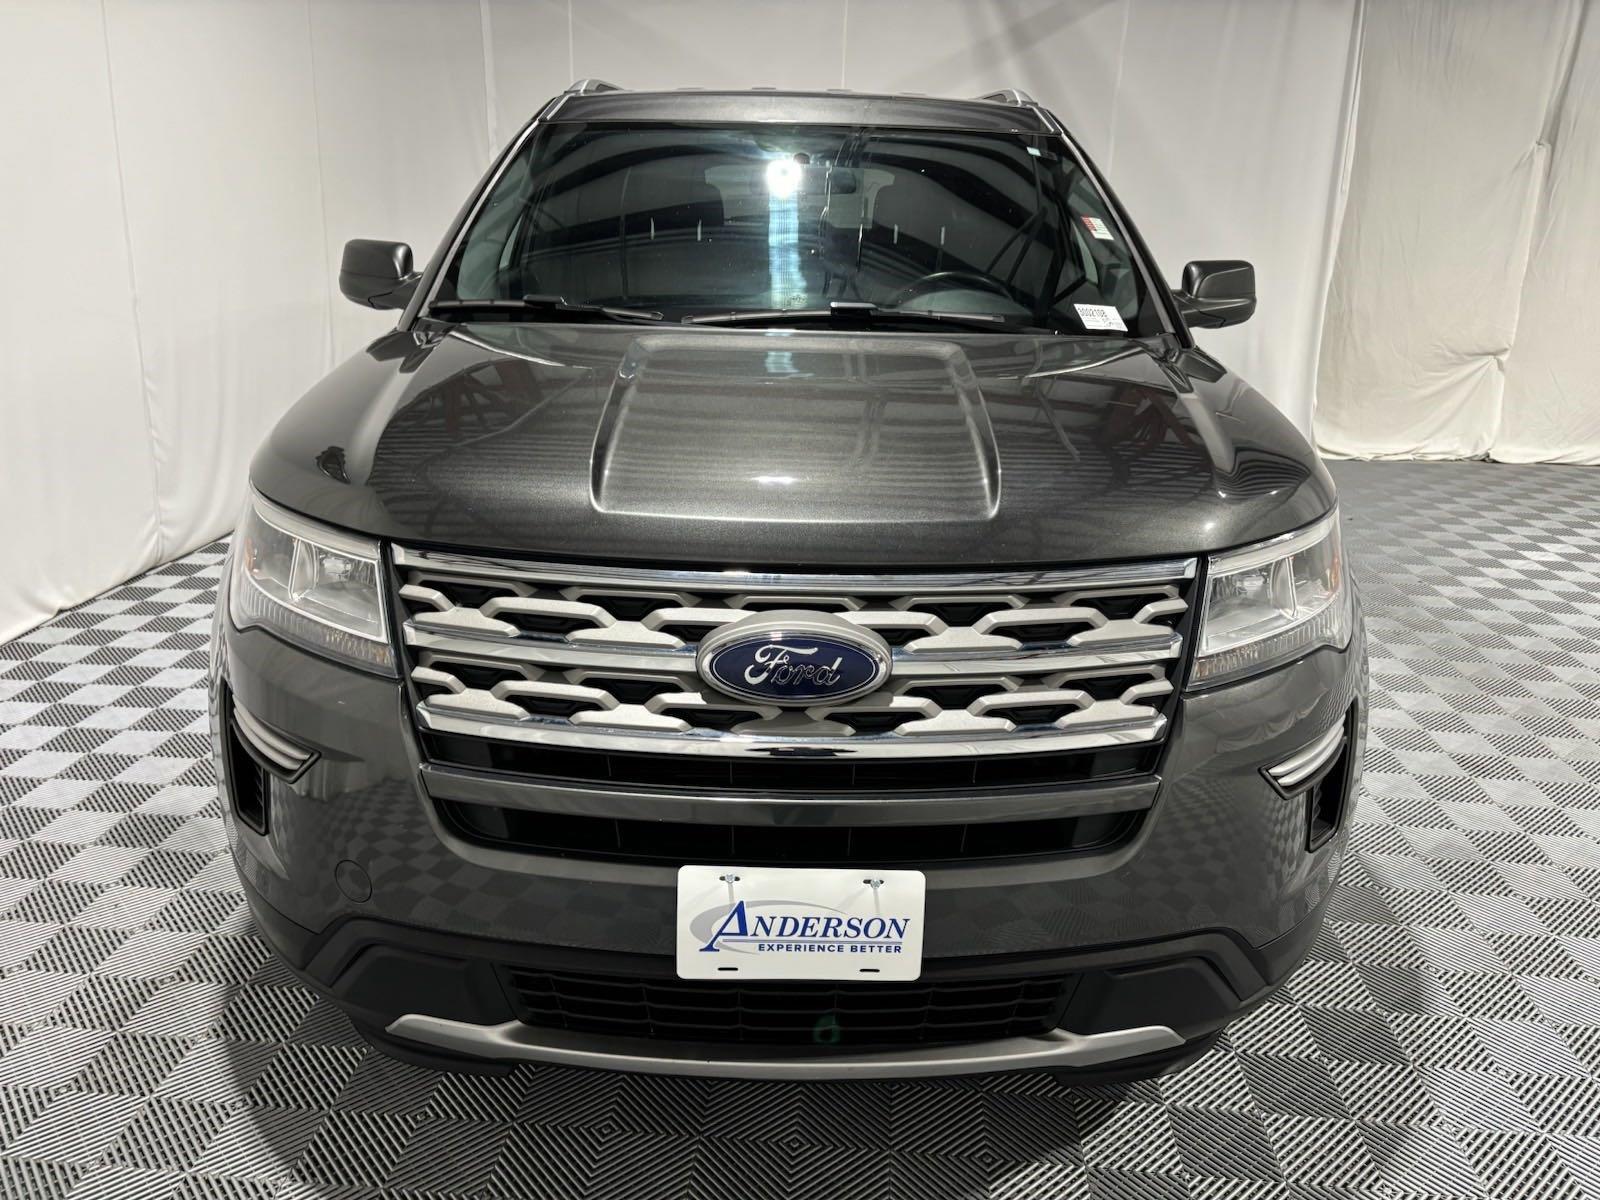 Used 2018 Ford Explorer XLT Sport Utility for sale in St Joseph MO